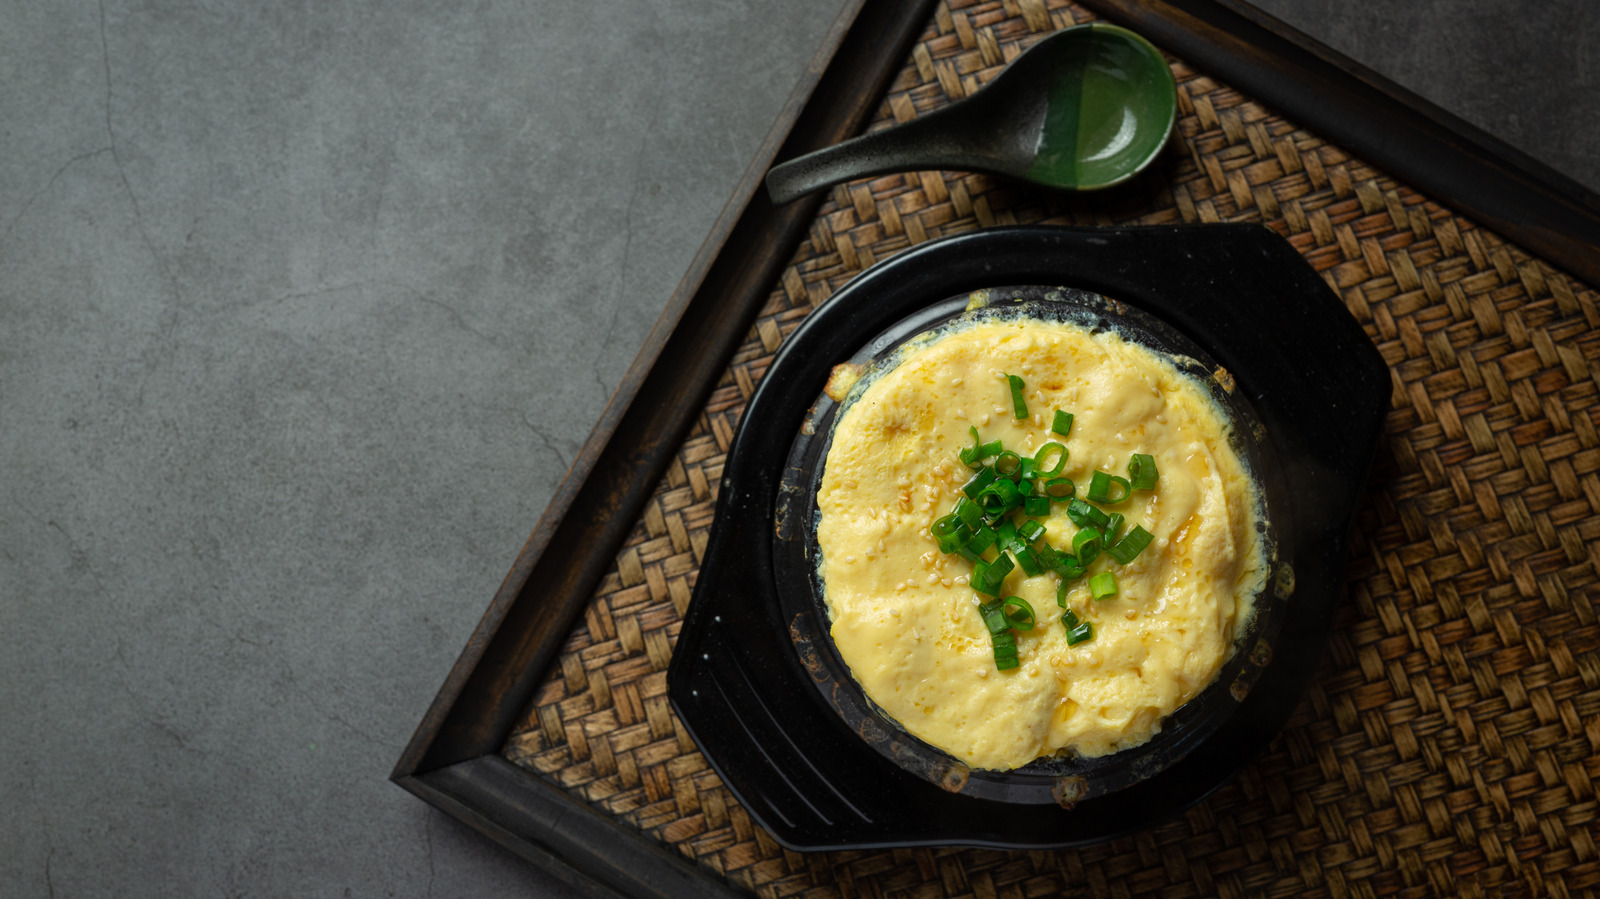 https://www.tastingtable.com/img/gallery/the-korean-steamed-egg-dish-you-should-know/l-intro-1658317126.jpg